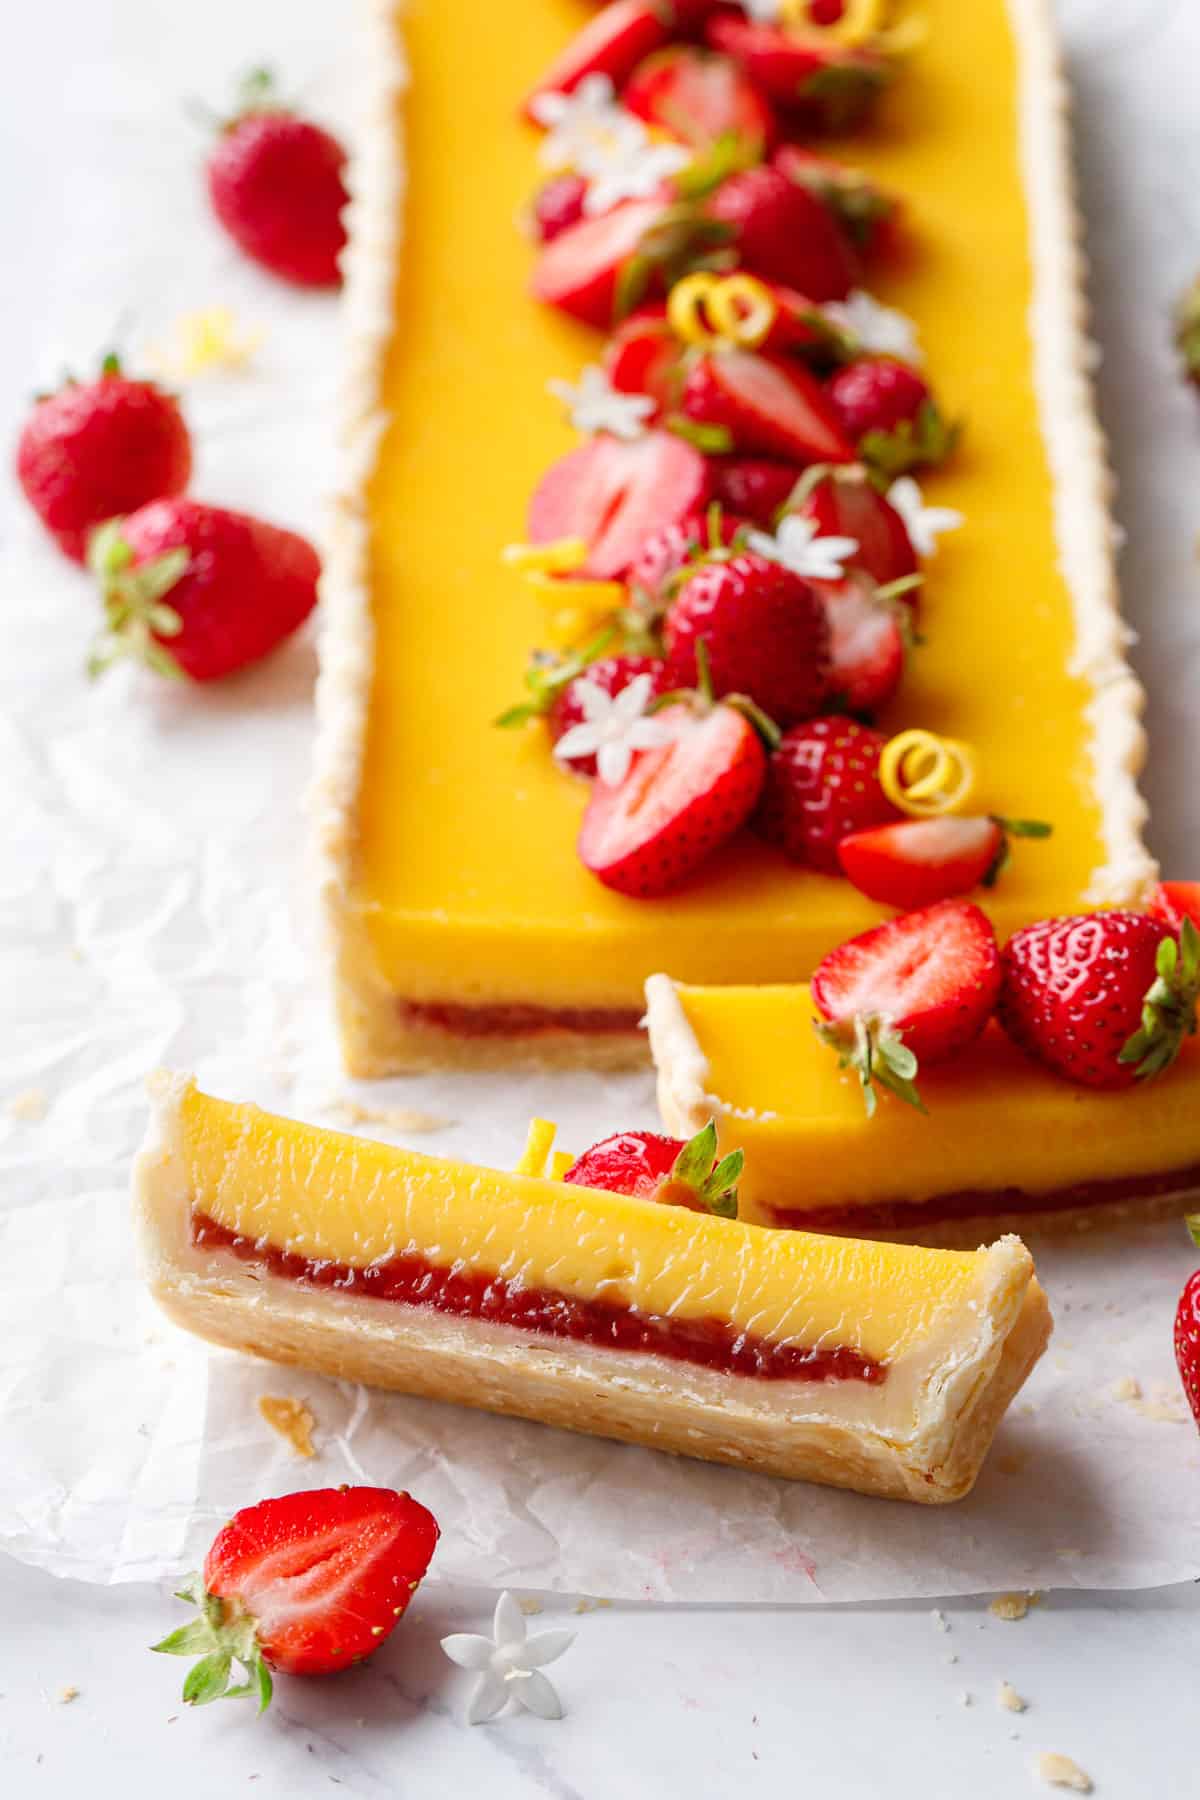 Strawberry Meyer Lemon Tart with bright yellow lemon curd filling and a layer of strawberry jam on the bottom.